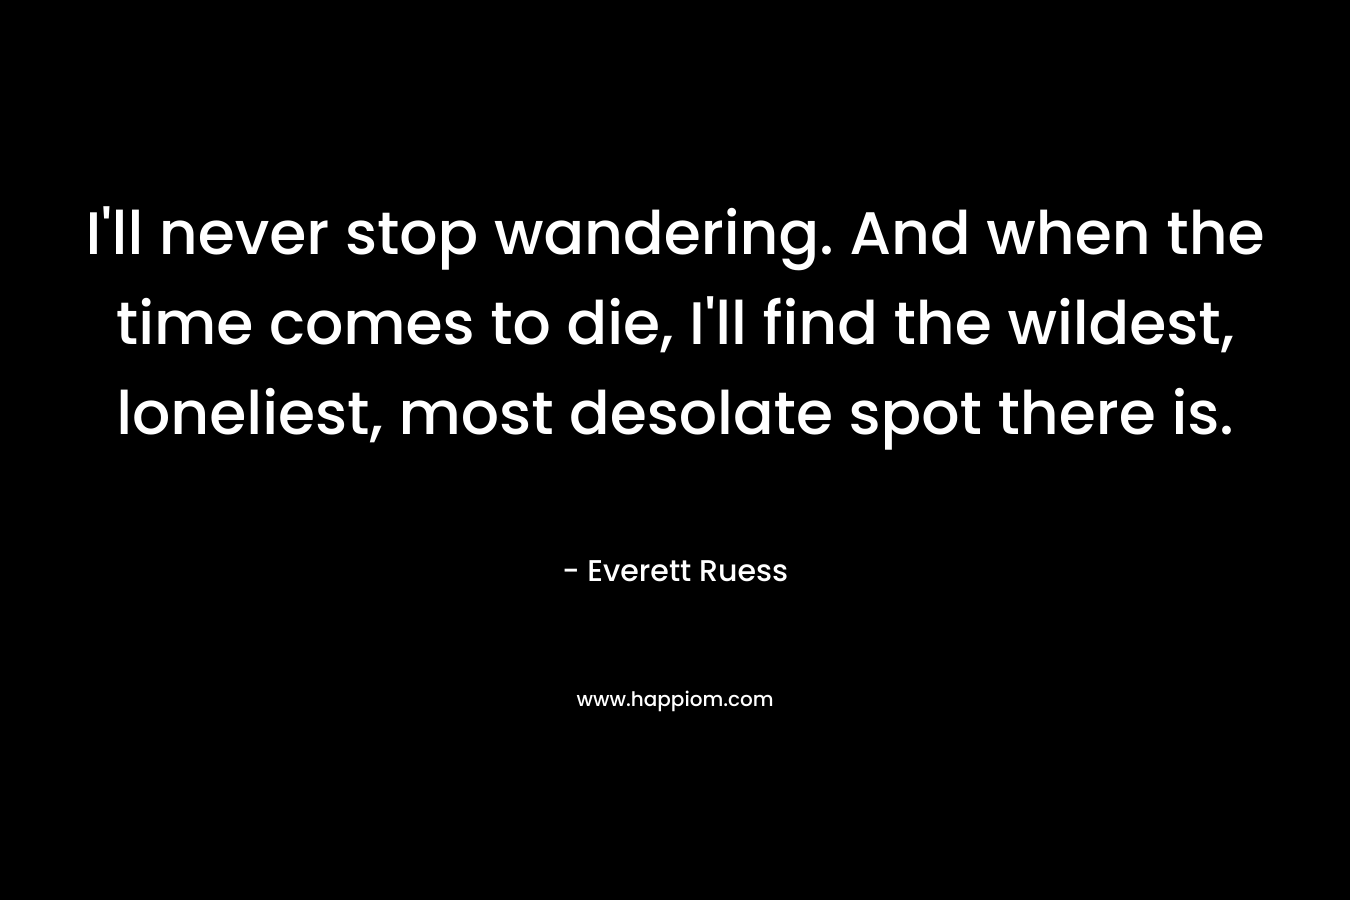 I’ll never stop wandering. And when the time comes to die, I’ll find the wildest, loneliest, most desolate spot there is. – Everett Ruess